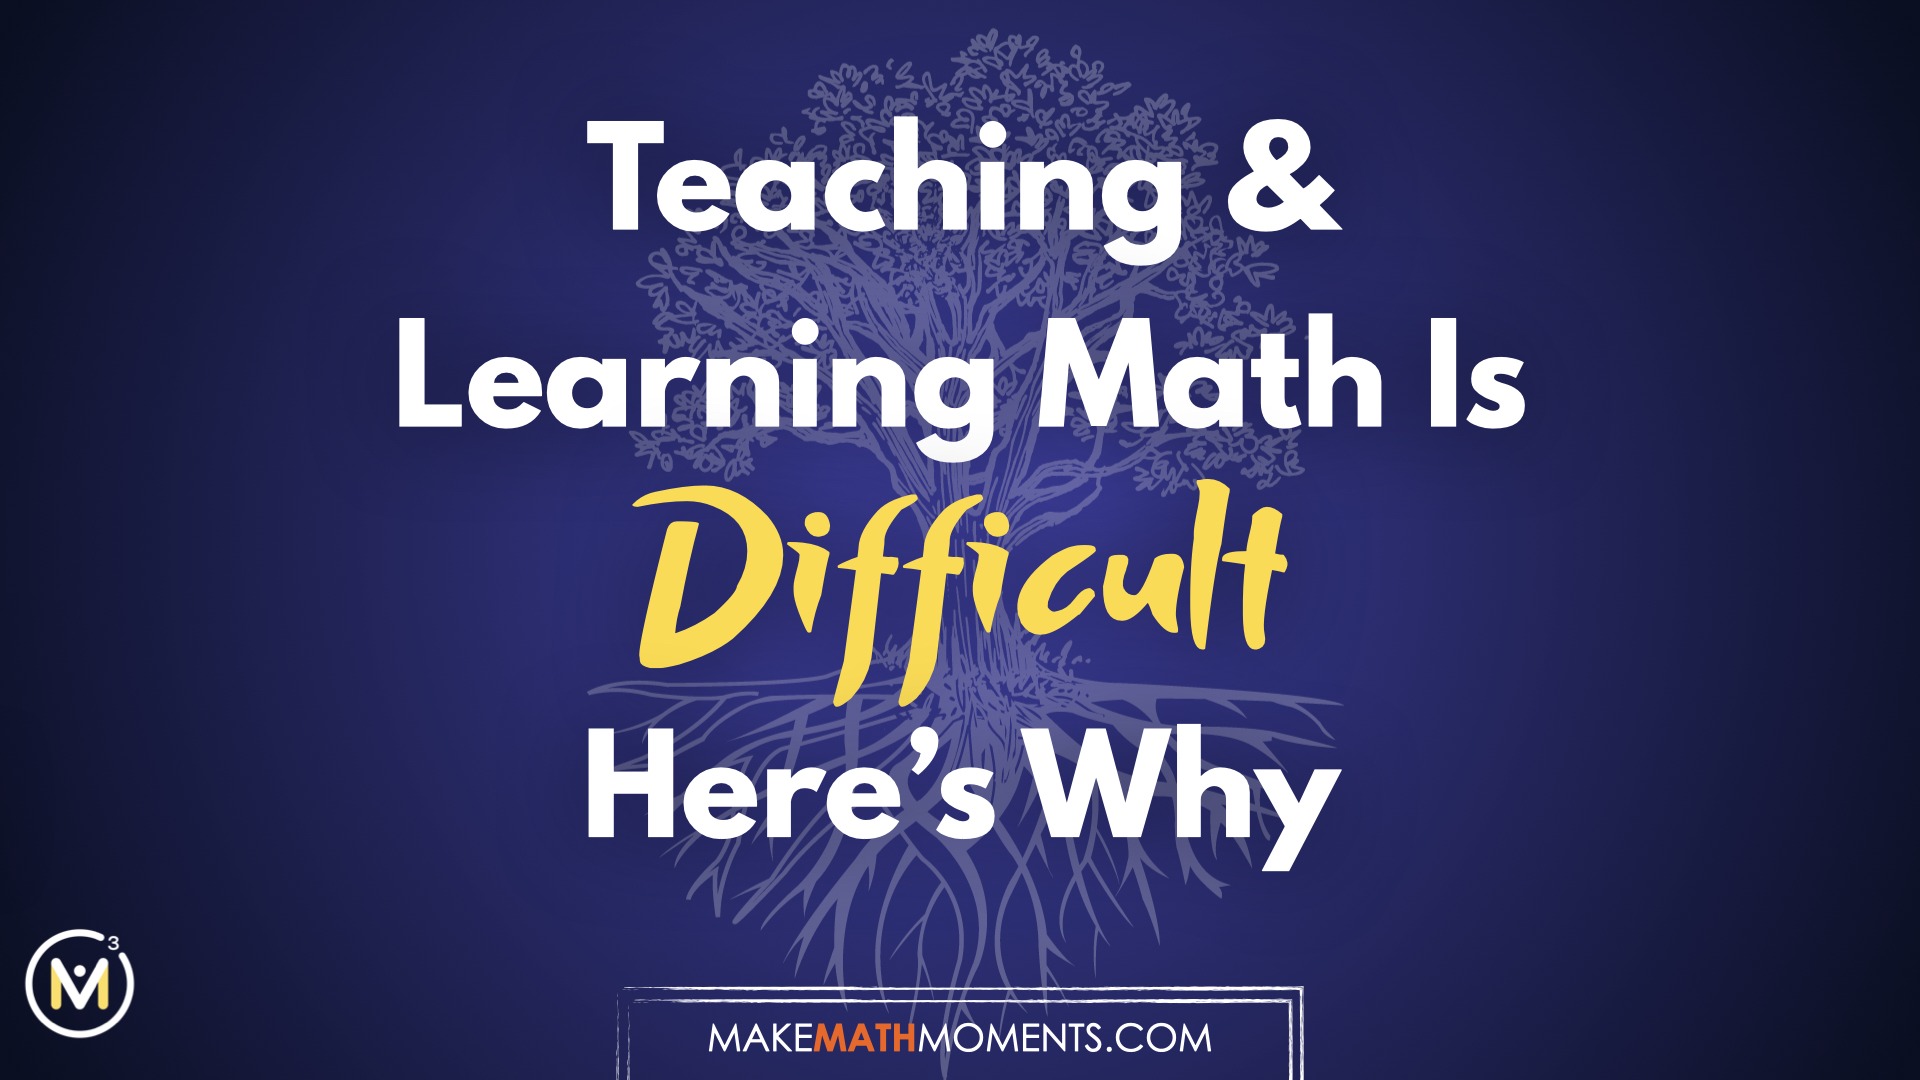 Teaching & Learning Math Is Difficult